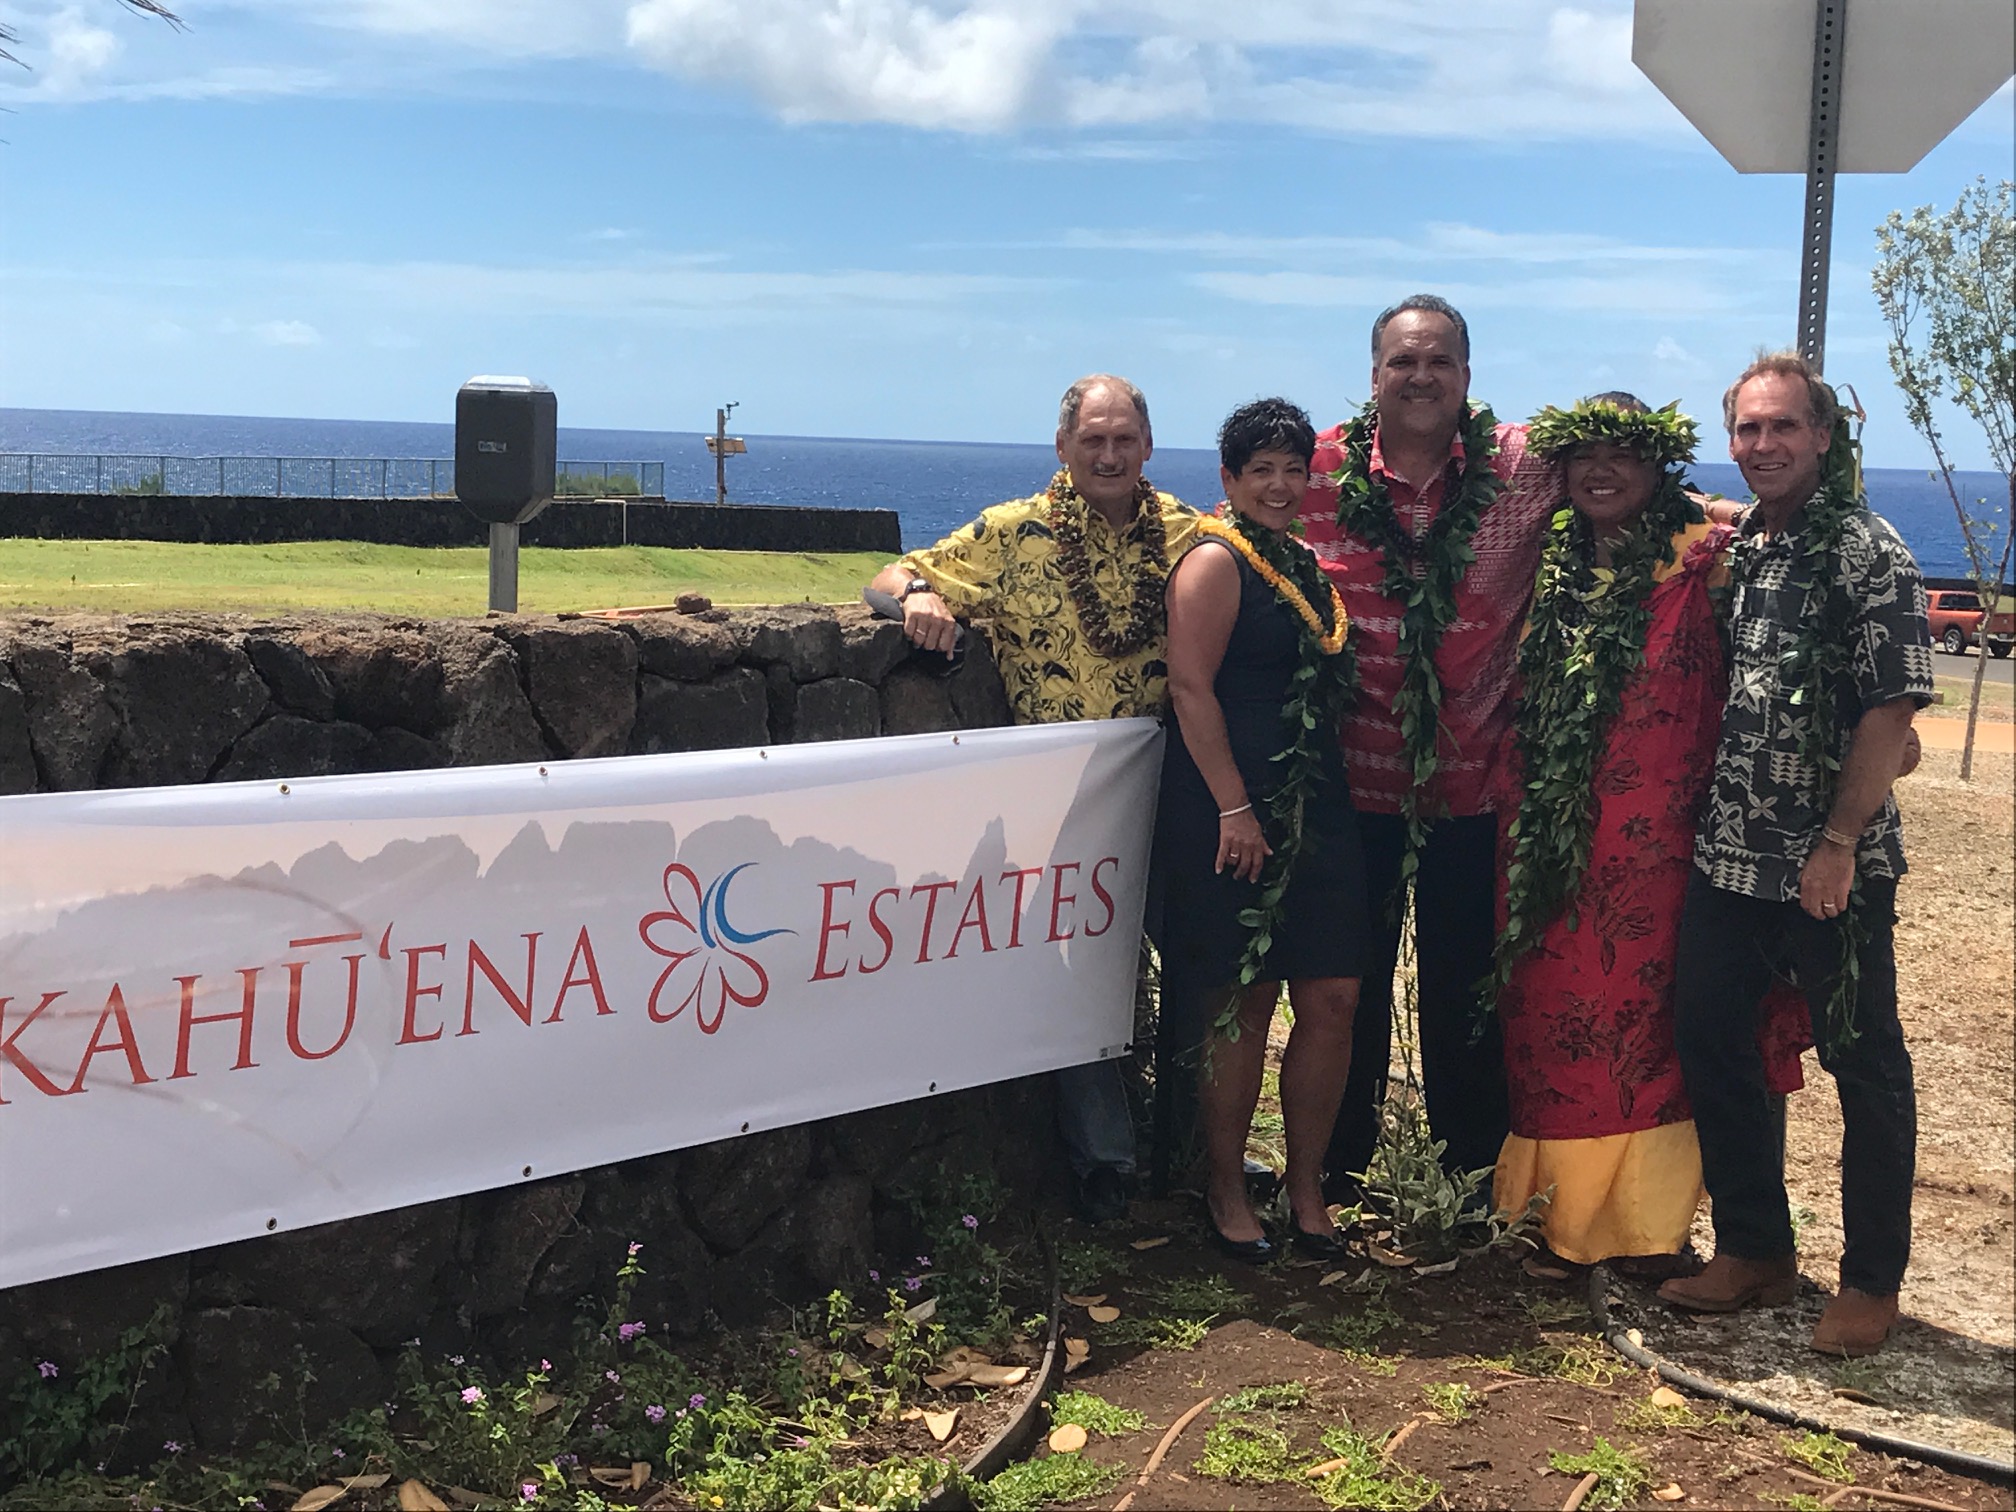 A group gathered Aug. 9 for the Makahu’ena Estates dedication ceremony. L to R: CIRI consultant Jan TenBruggencate, CIRI President and CEO Sophie Minich, Kaua’i Mayor Bernard Carvalho, cultural practitioner Kahu Kauilani Kahalekai and prime contractor Jeff Fisher. Photo by Chad Nugent.